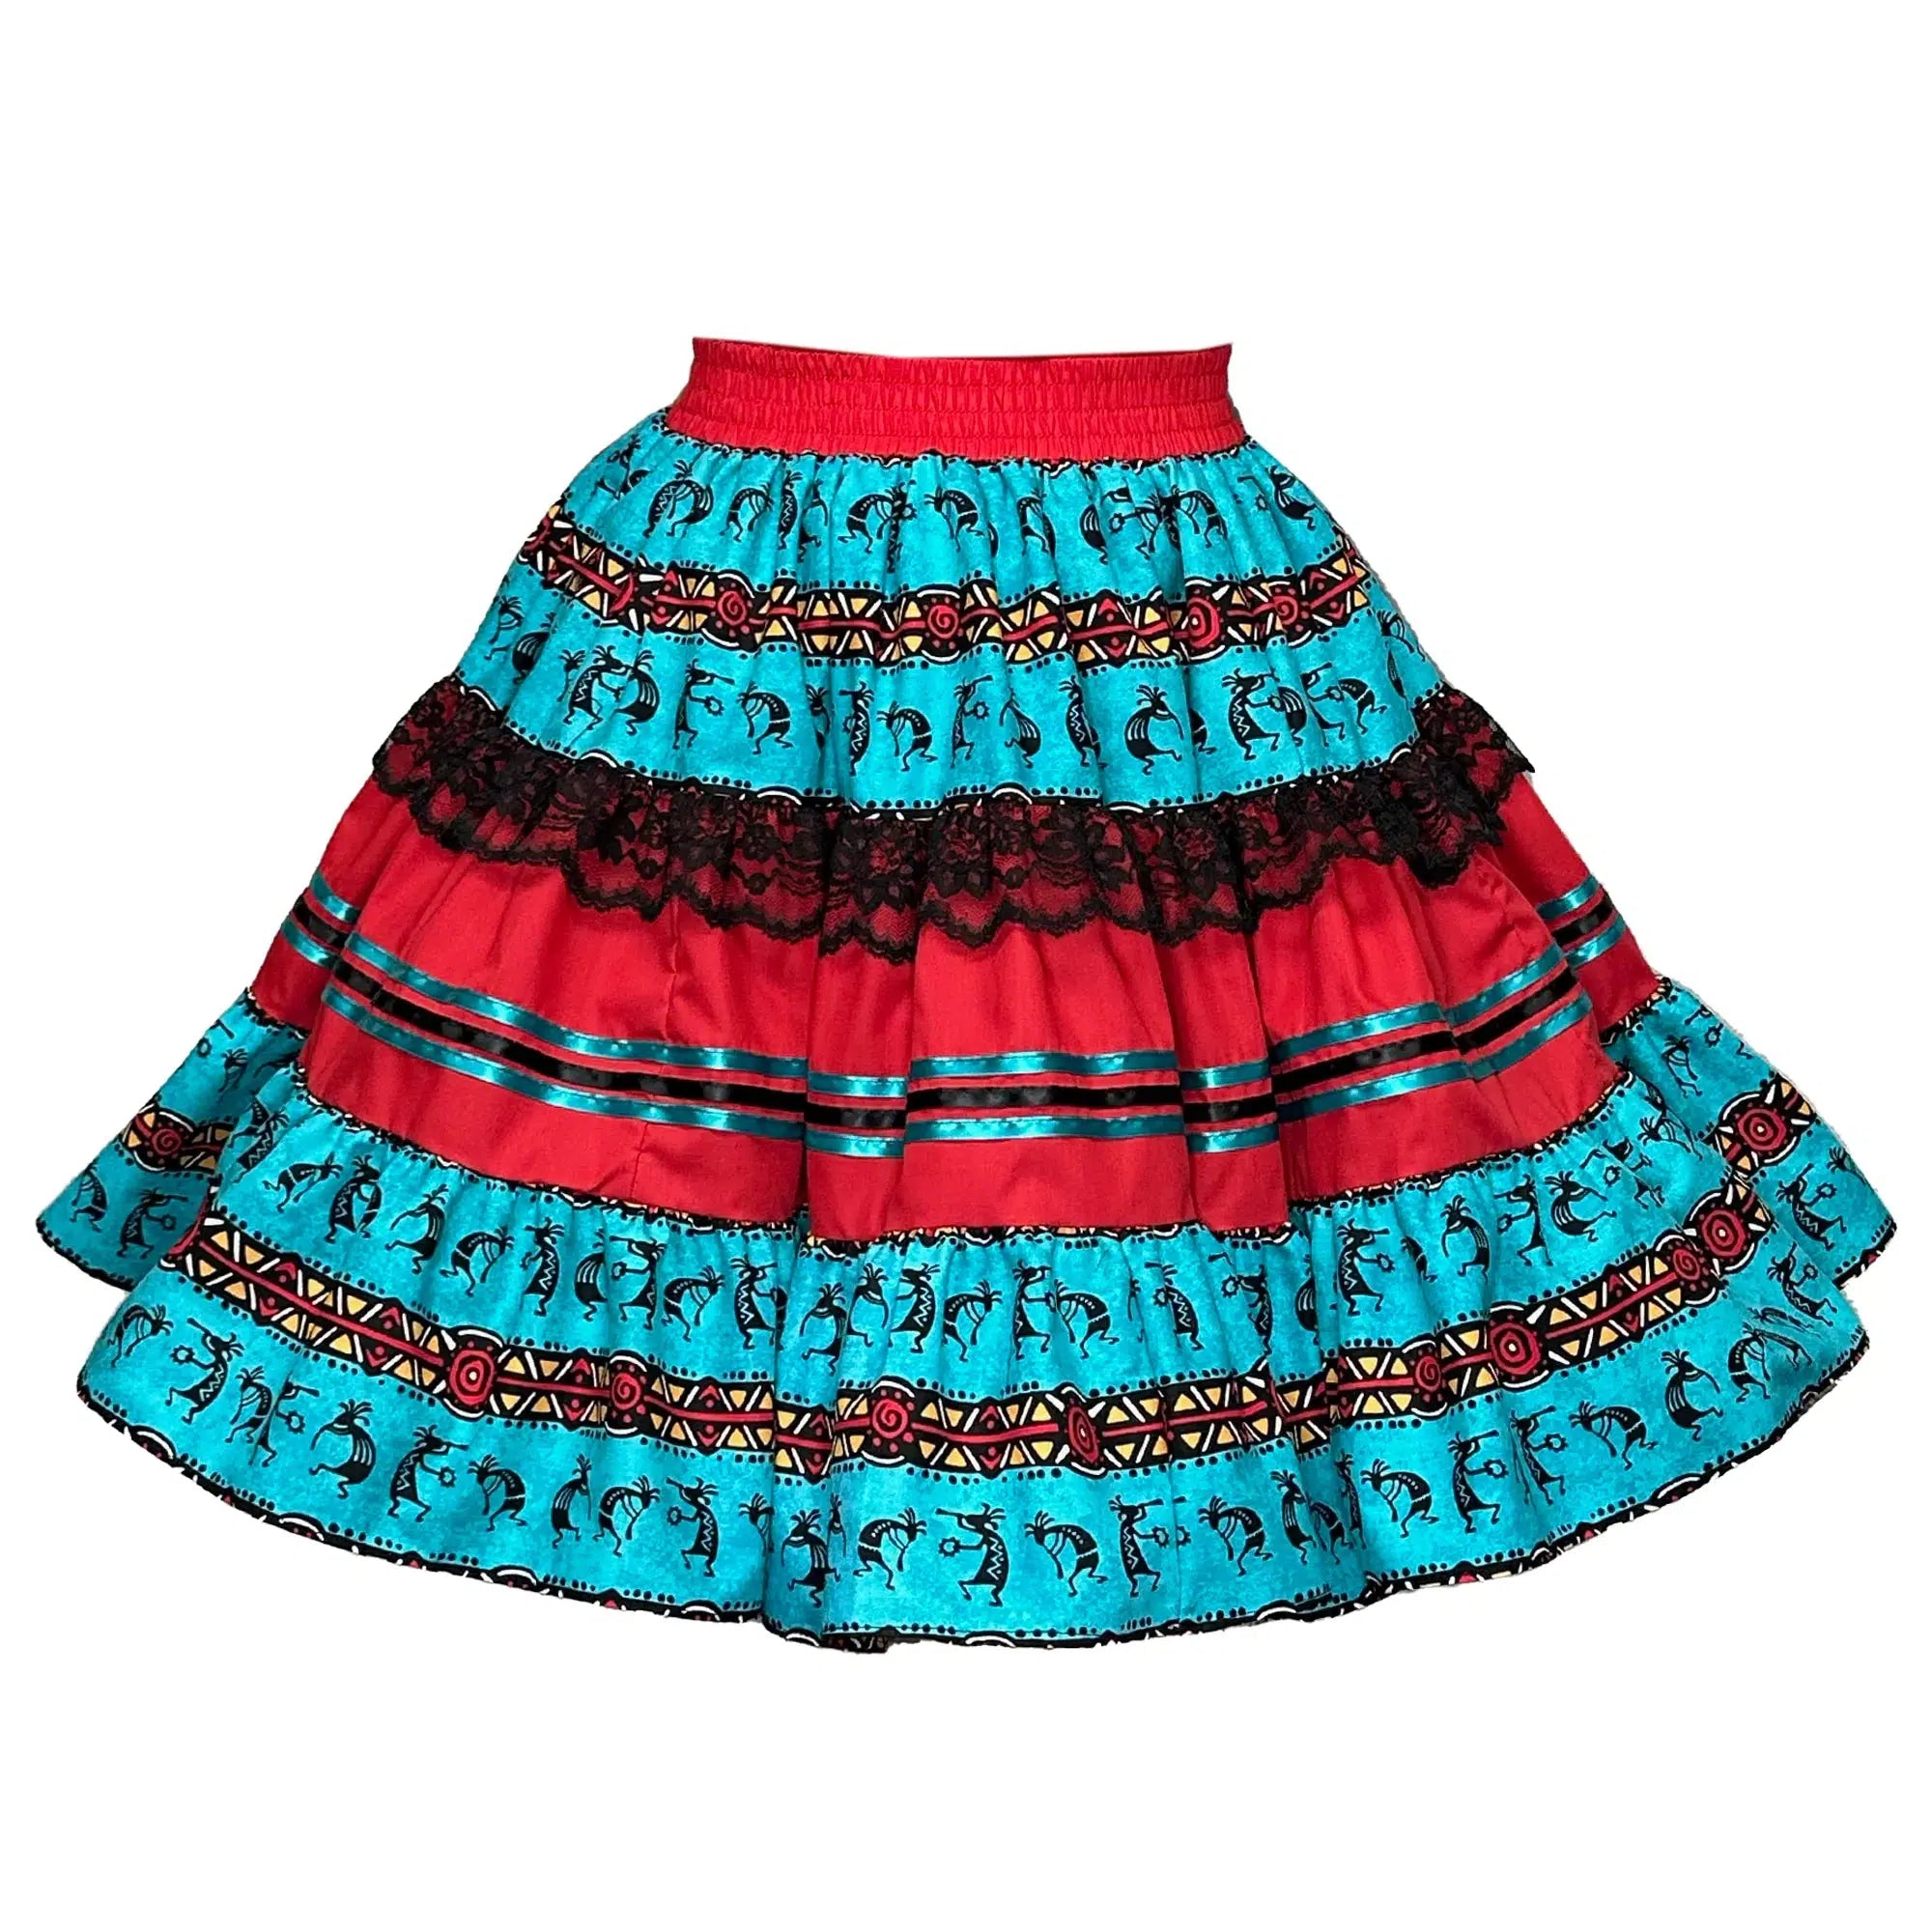 A blue and red Kokopelli Square Dance skirt with a pattern on it from Square Up Fashions.